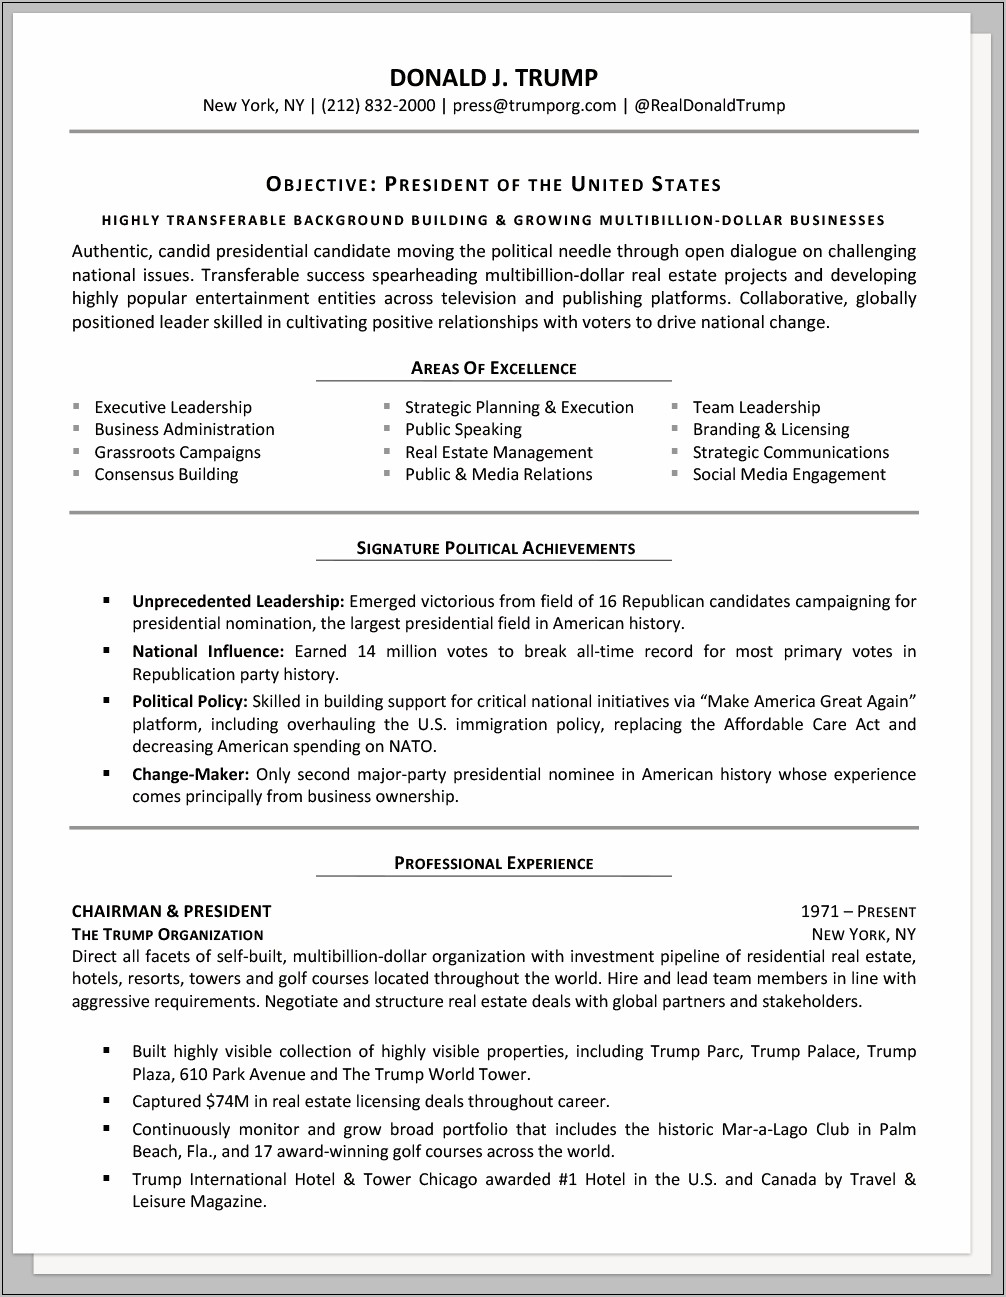 Resume Objective For Political Position Examples